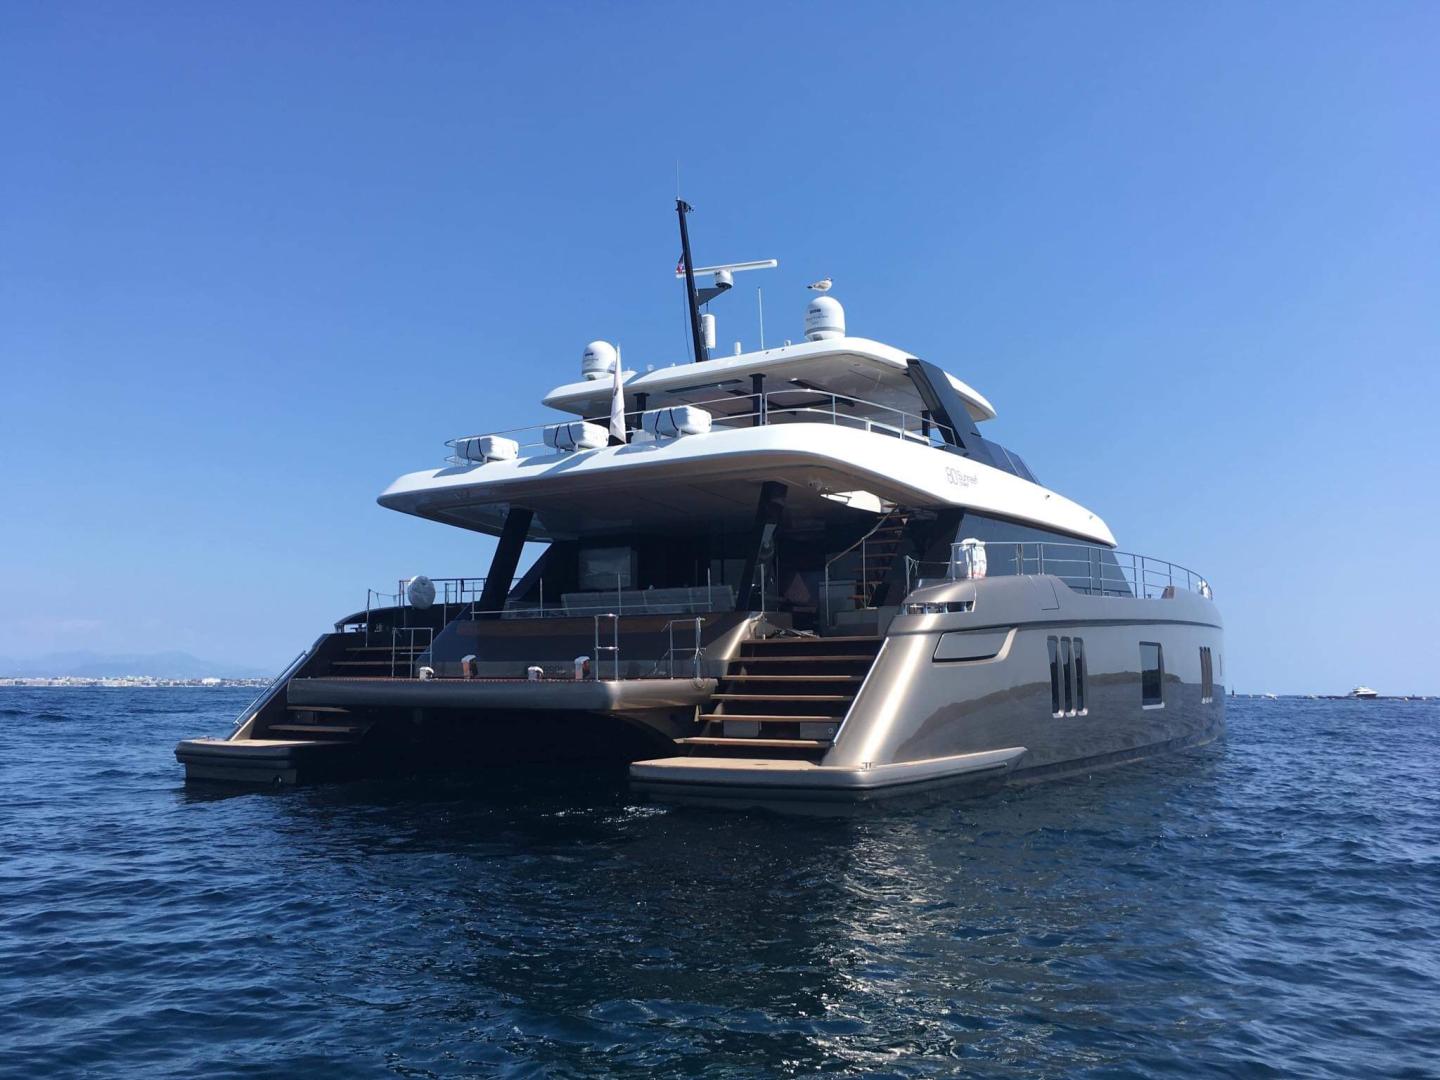 The 80 Sunreef Power Unveiled at the Cannes Yachting Festival 2019